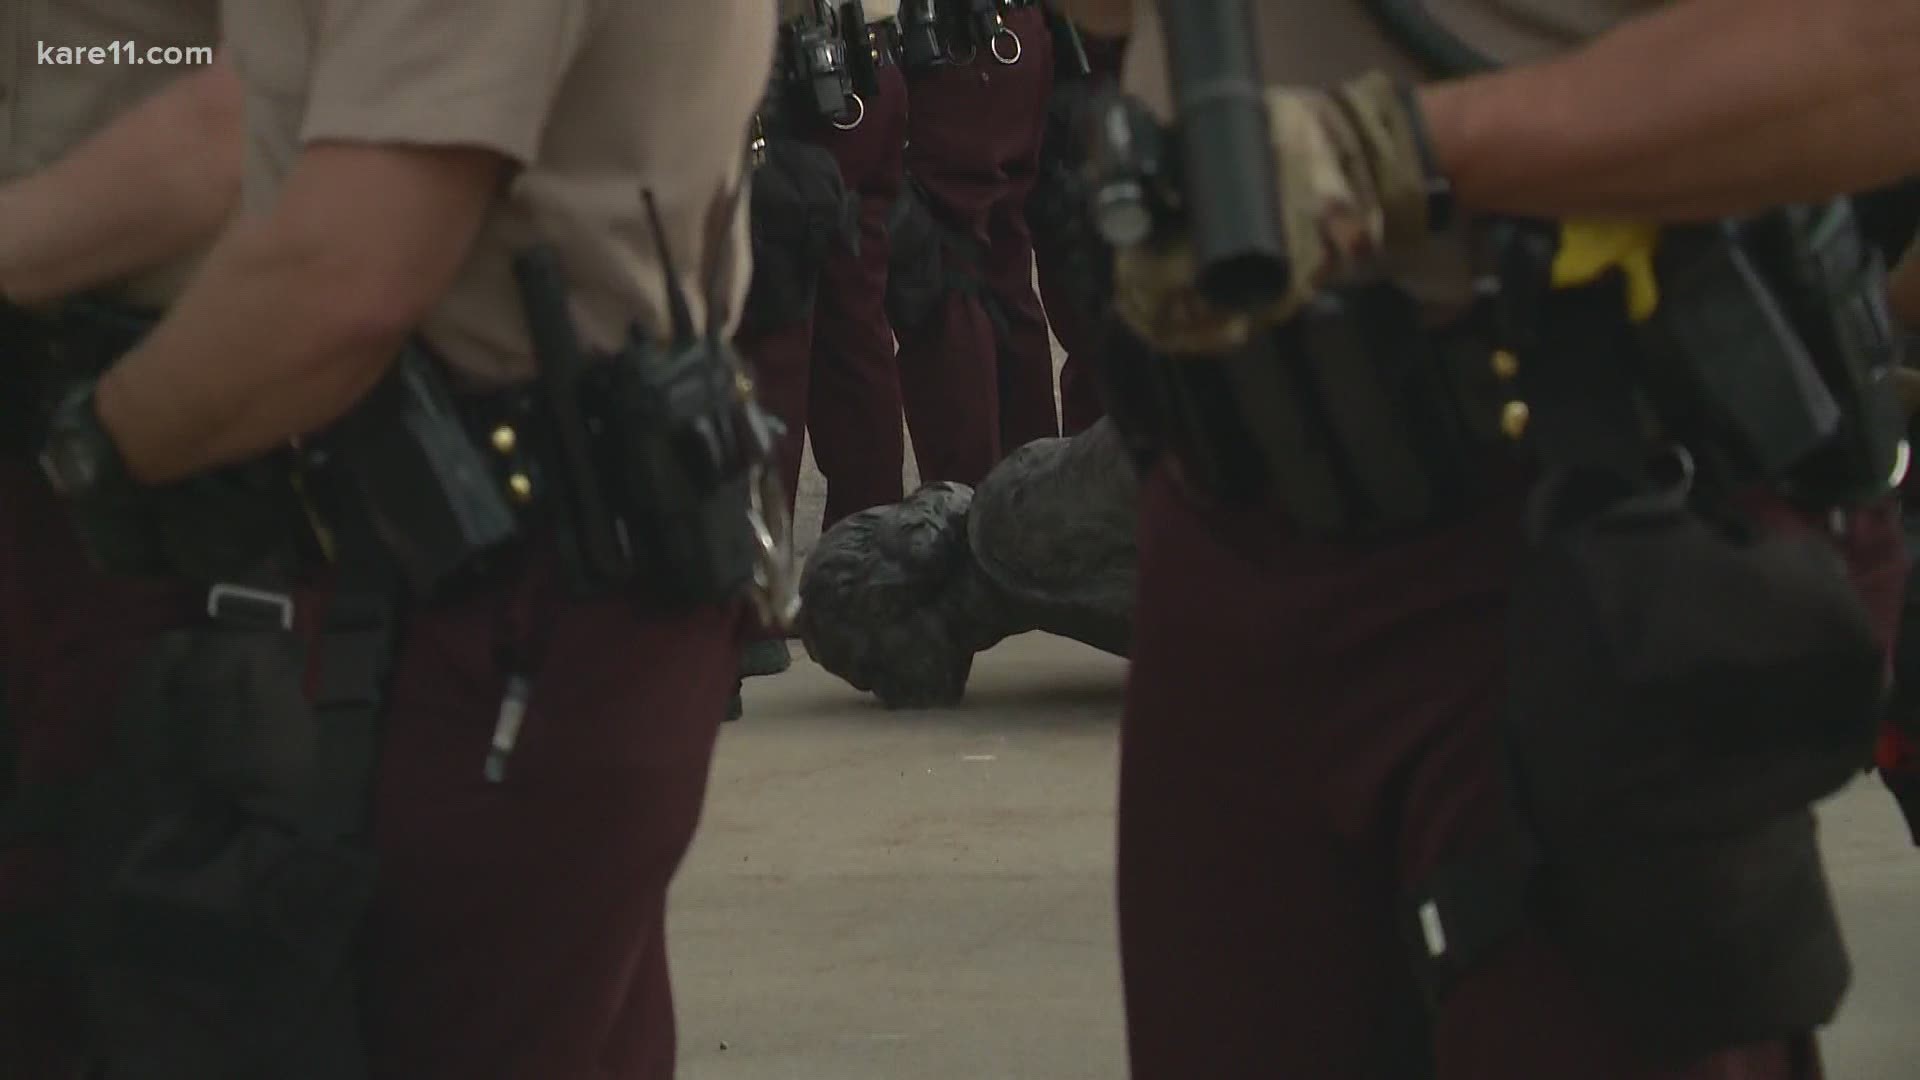 Protesters toppled the statue before State Troopers surrounded it.